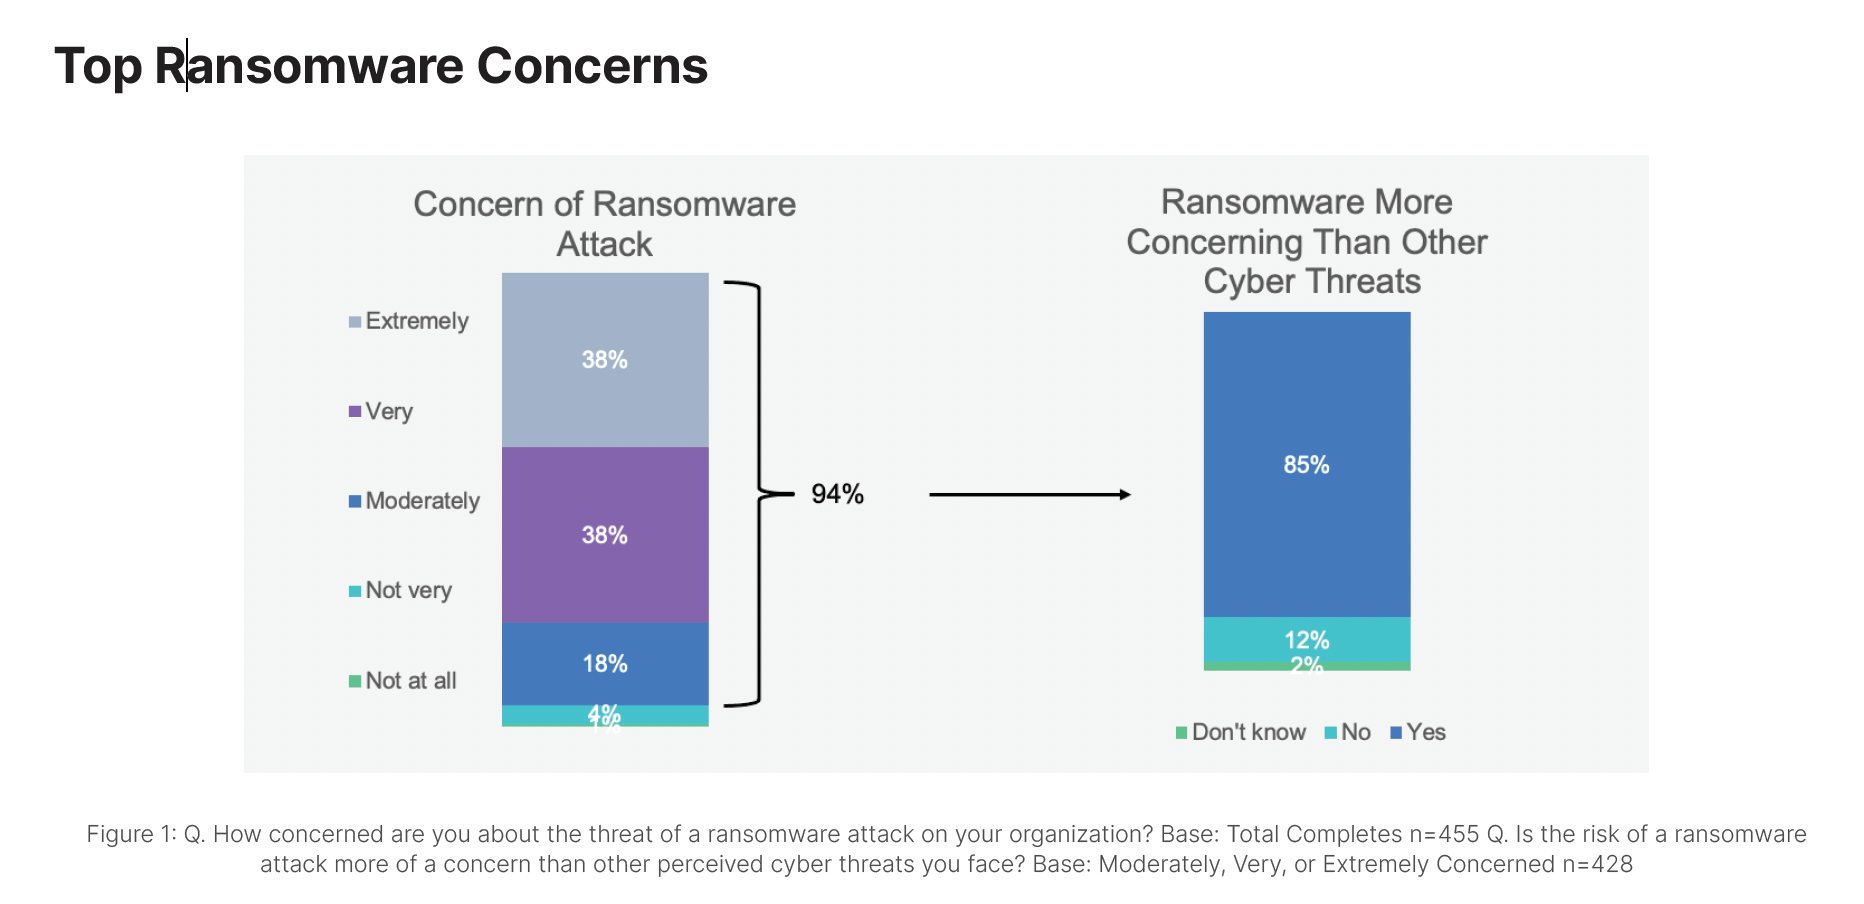 Top Ransomware Concerns